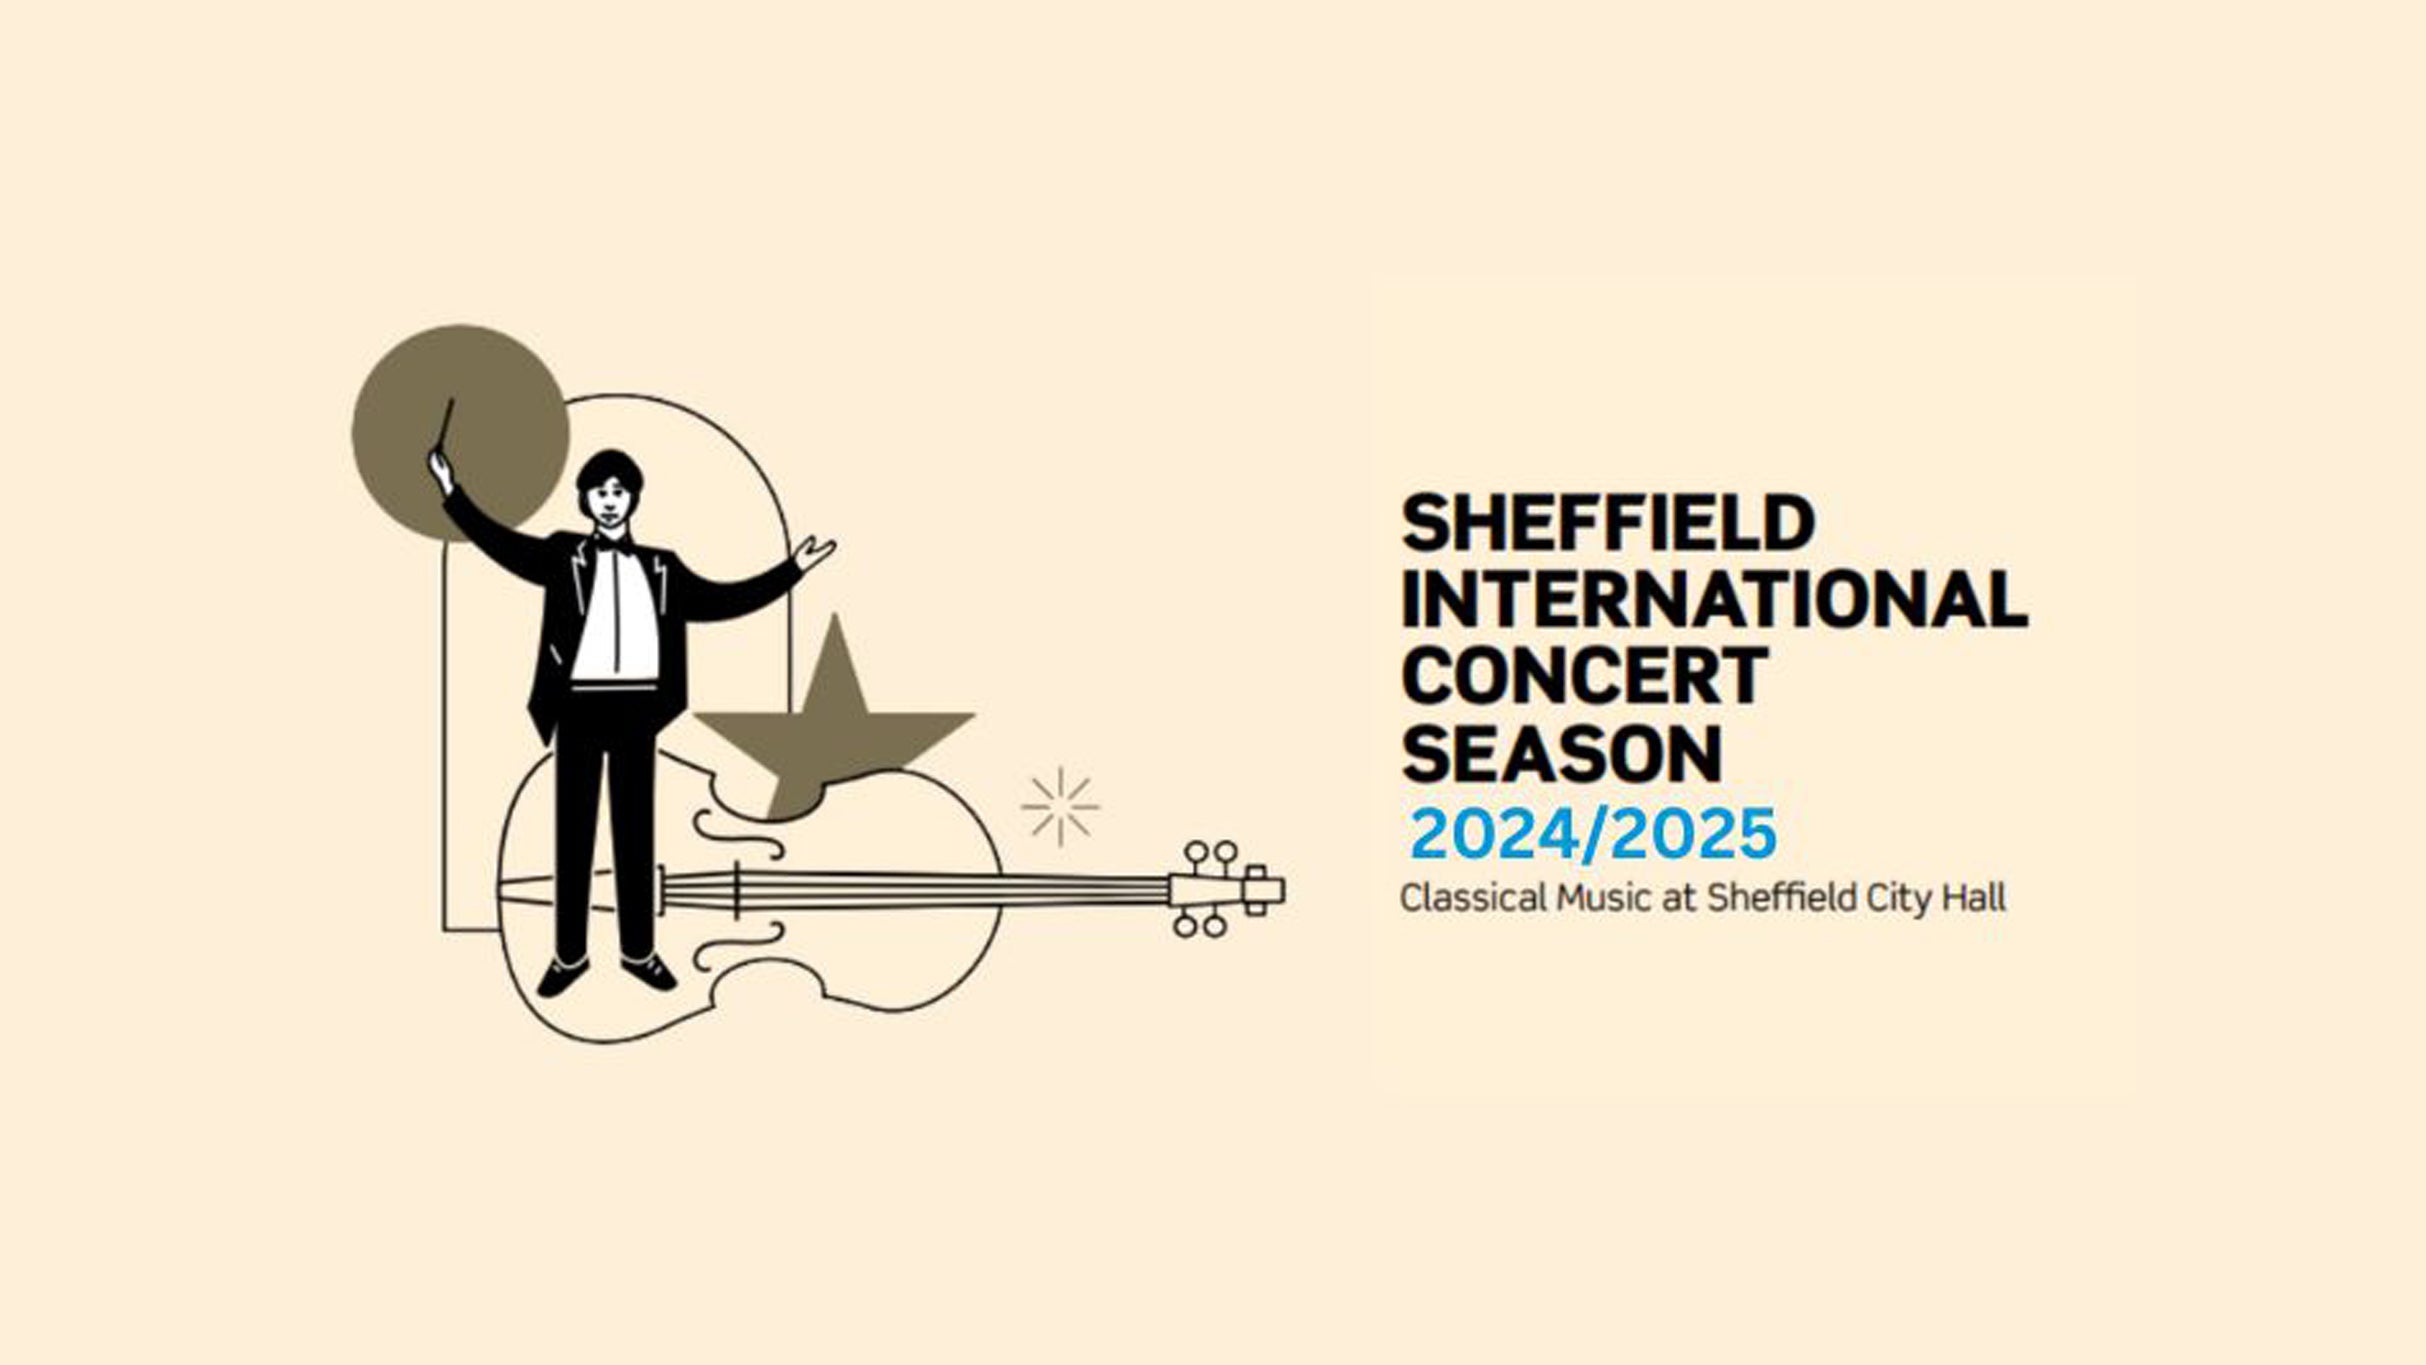 Sheffield Int. Concert Season 2024/25 - Royal Northern Sinfonia Event Title Pic